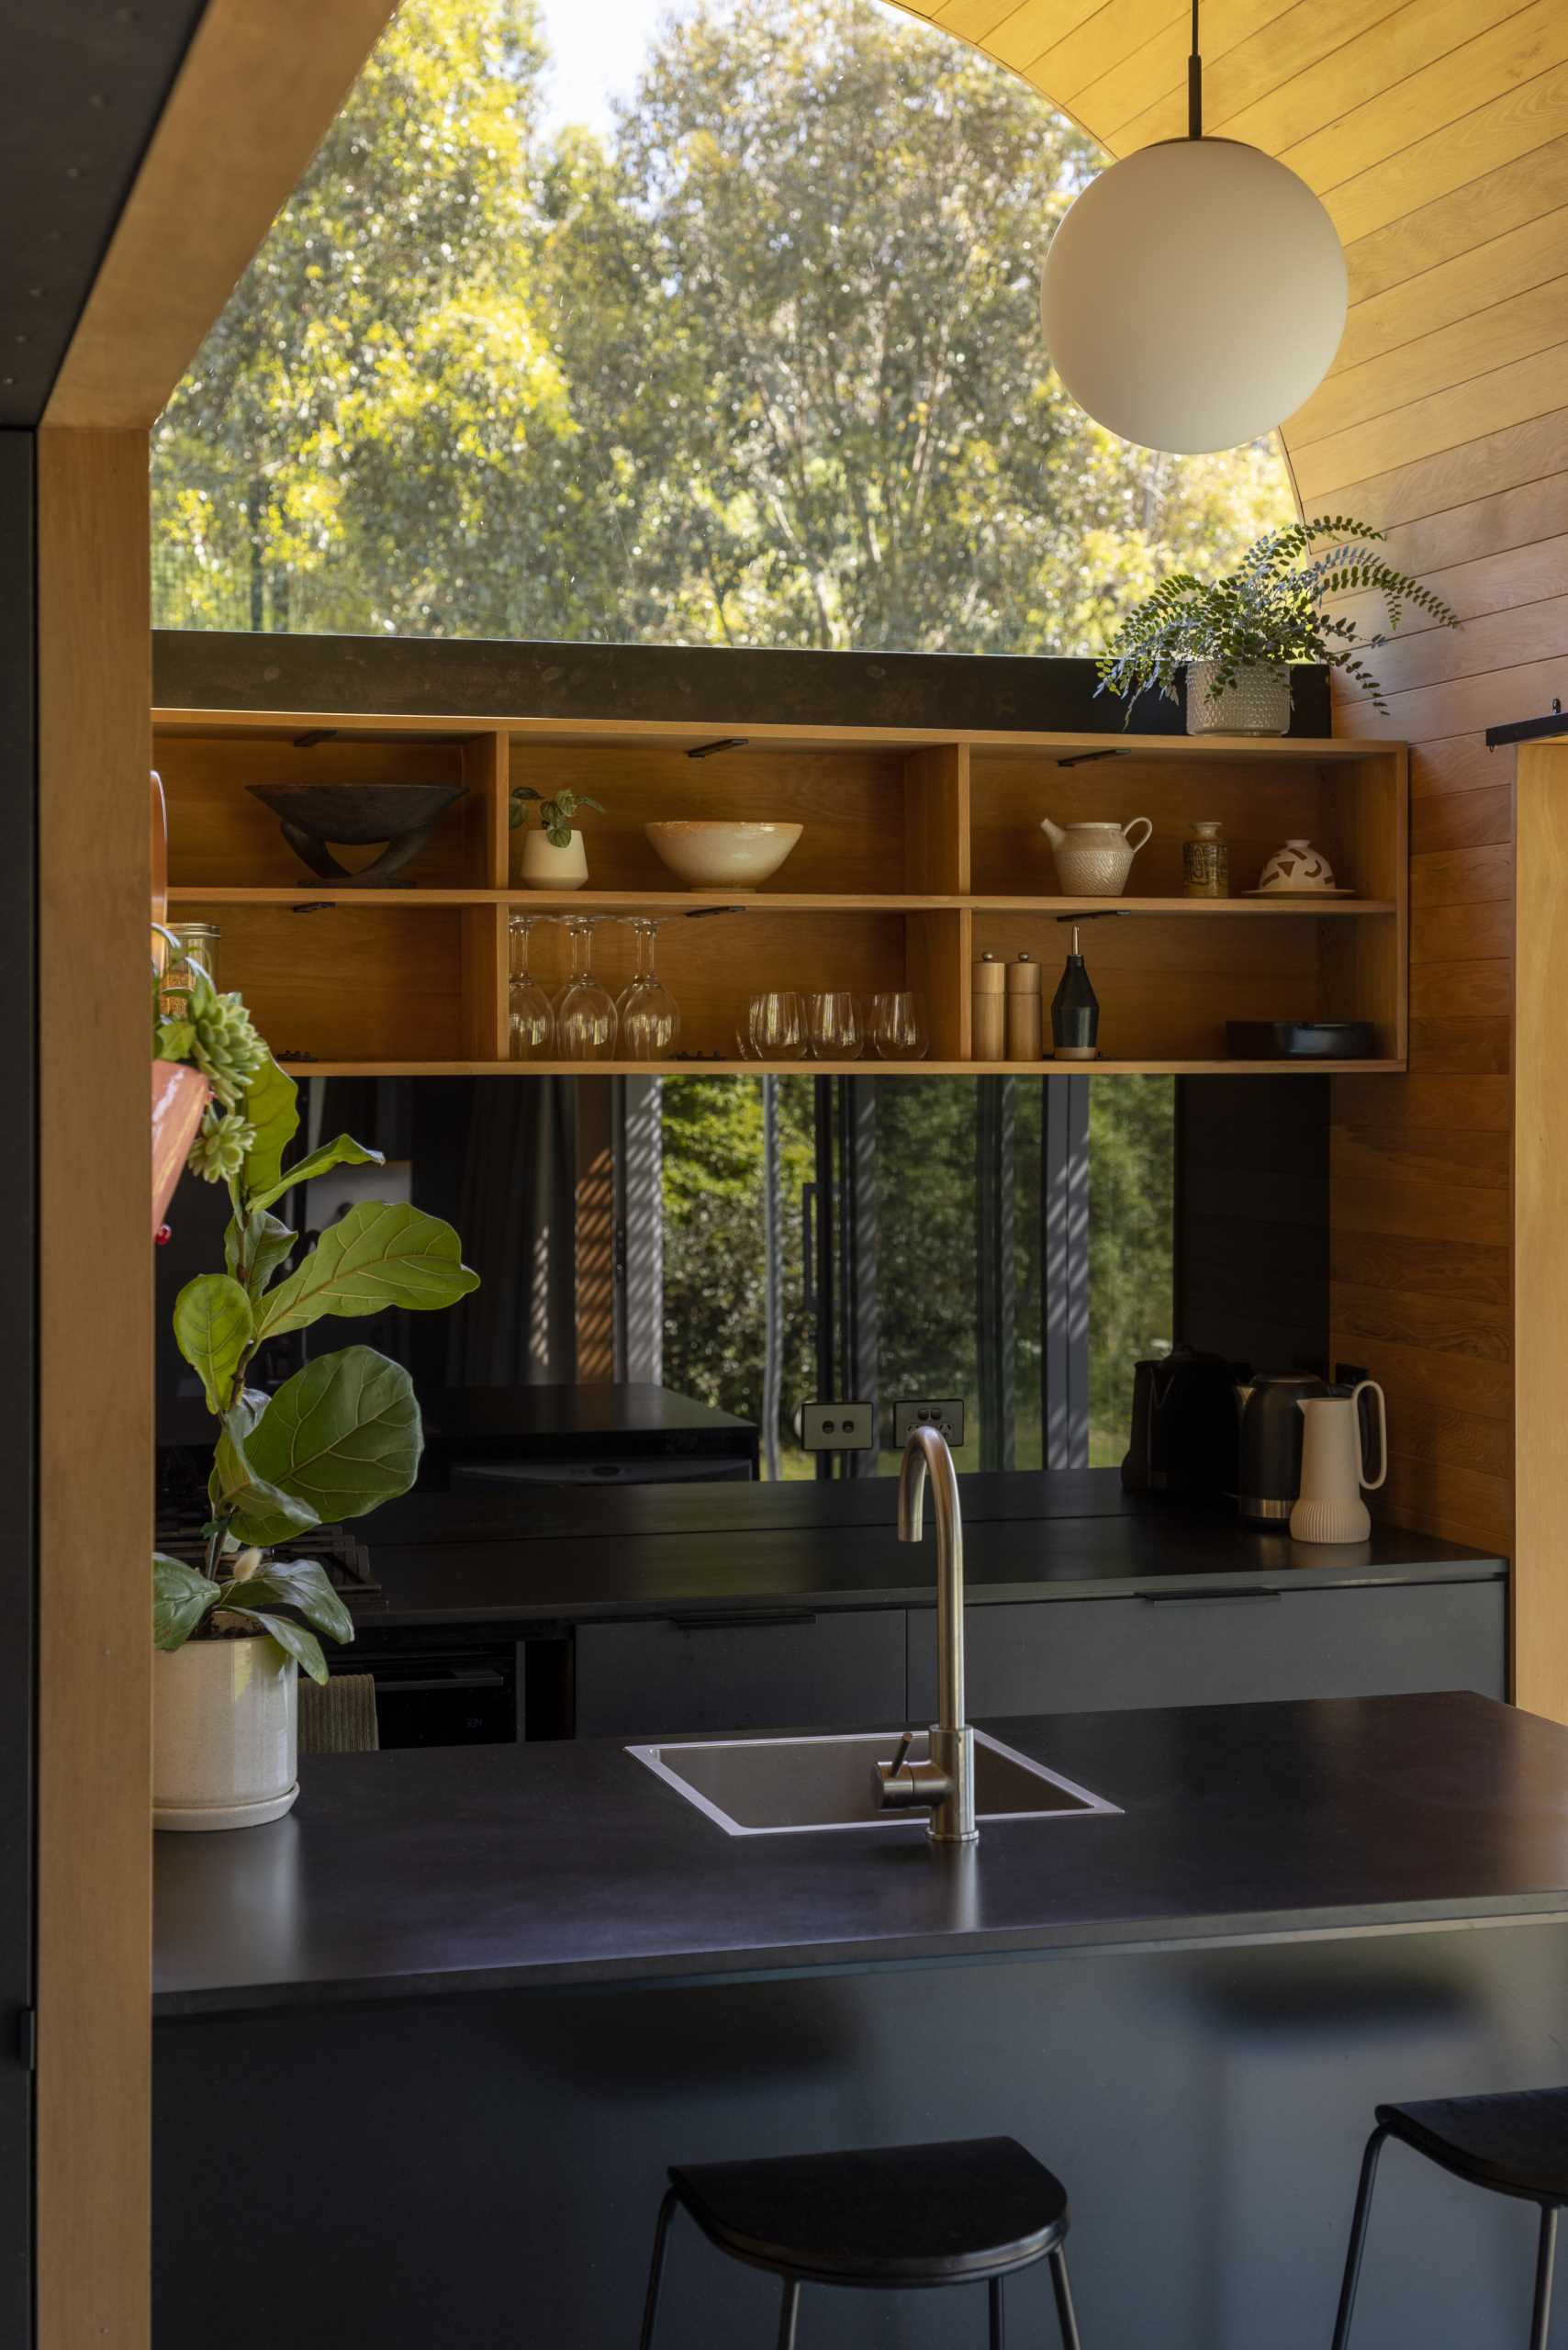 A black and wood kitchen in a small one-bedroom home.